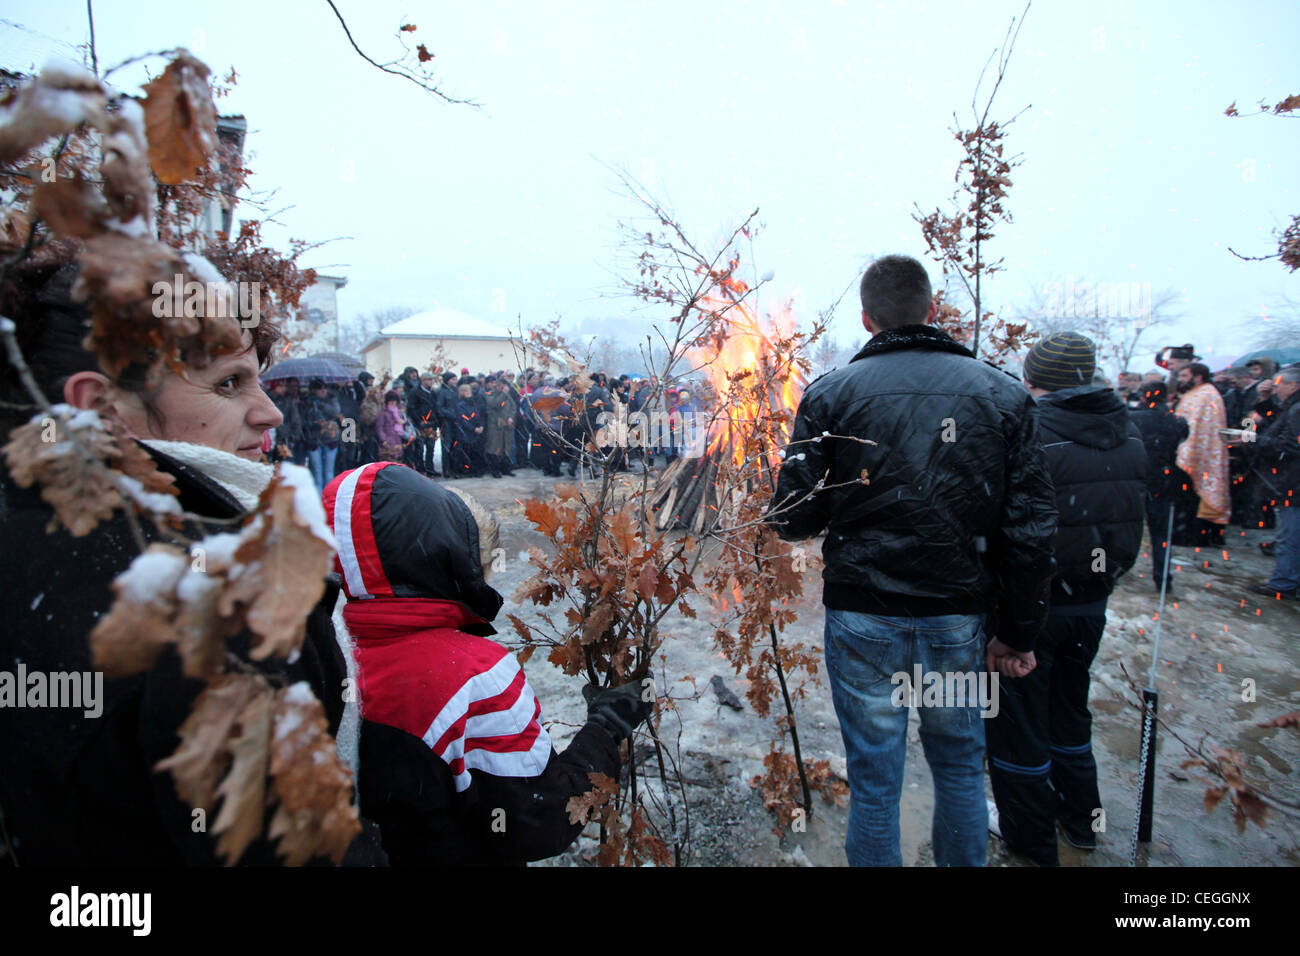 People waiting to place wood on the public campfire during orthodox christmas celebration in Mojkovac, Montenegro, Balkans Stock Photo